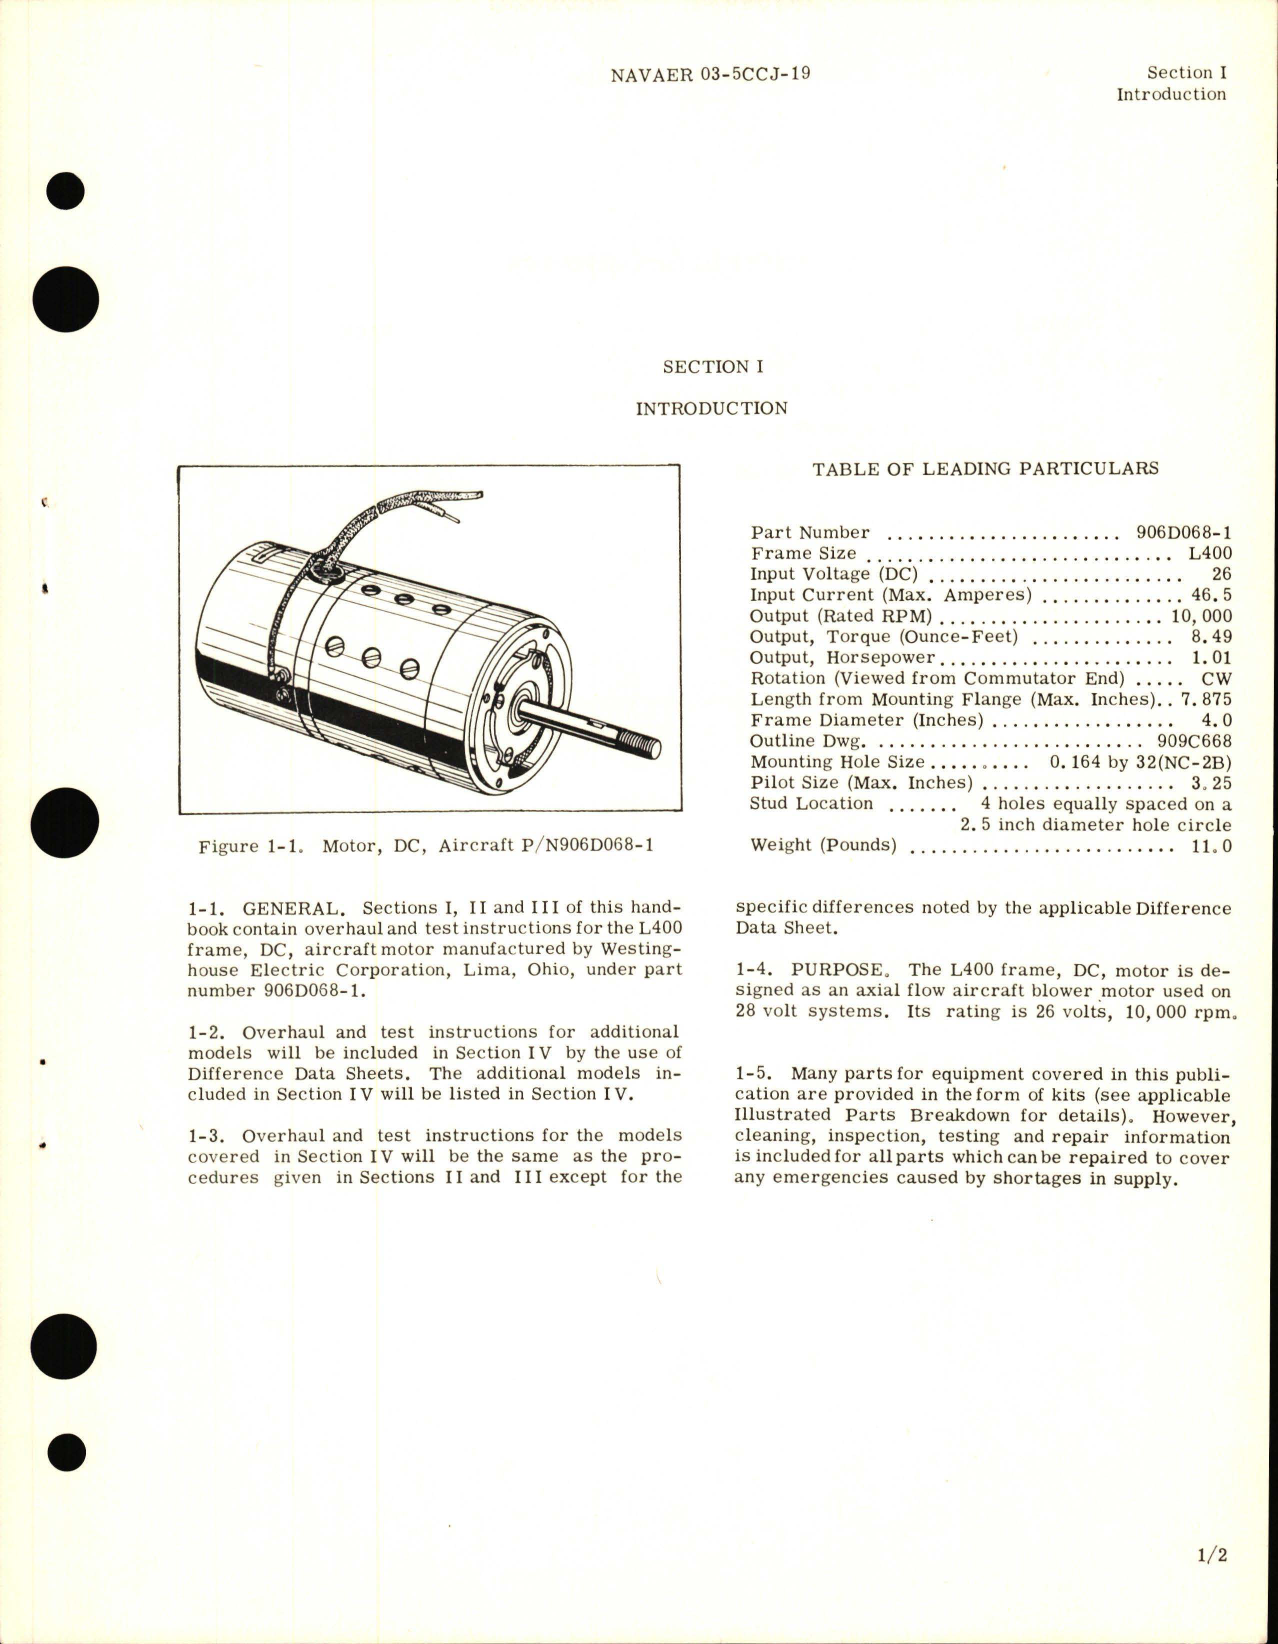 Sample page 5 from AirCorps Library document: Overhaul Instructions for DC Motor - Part 906D068-1